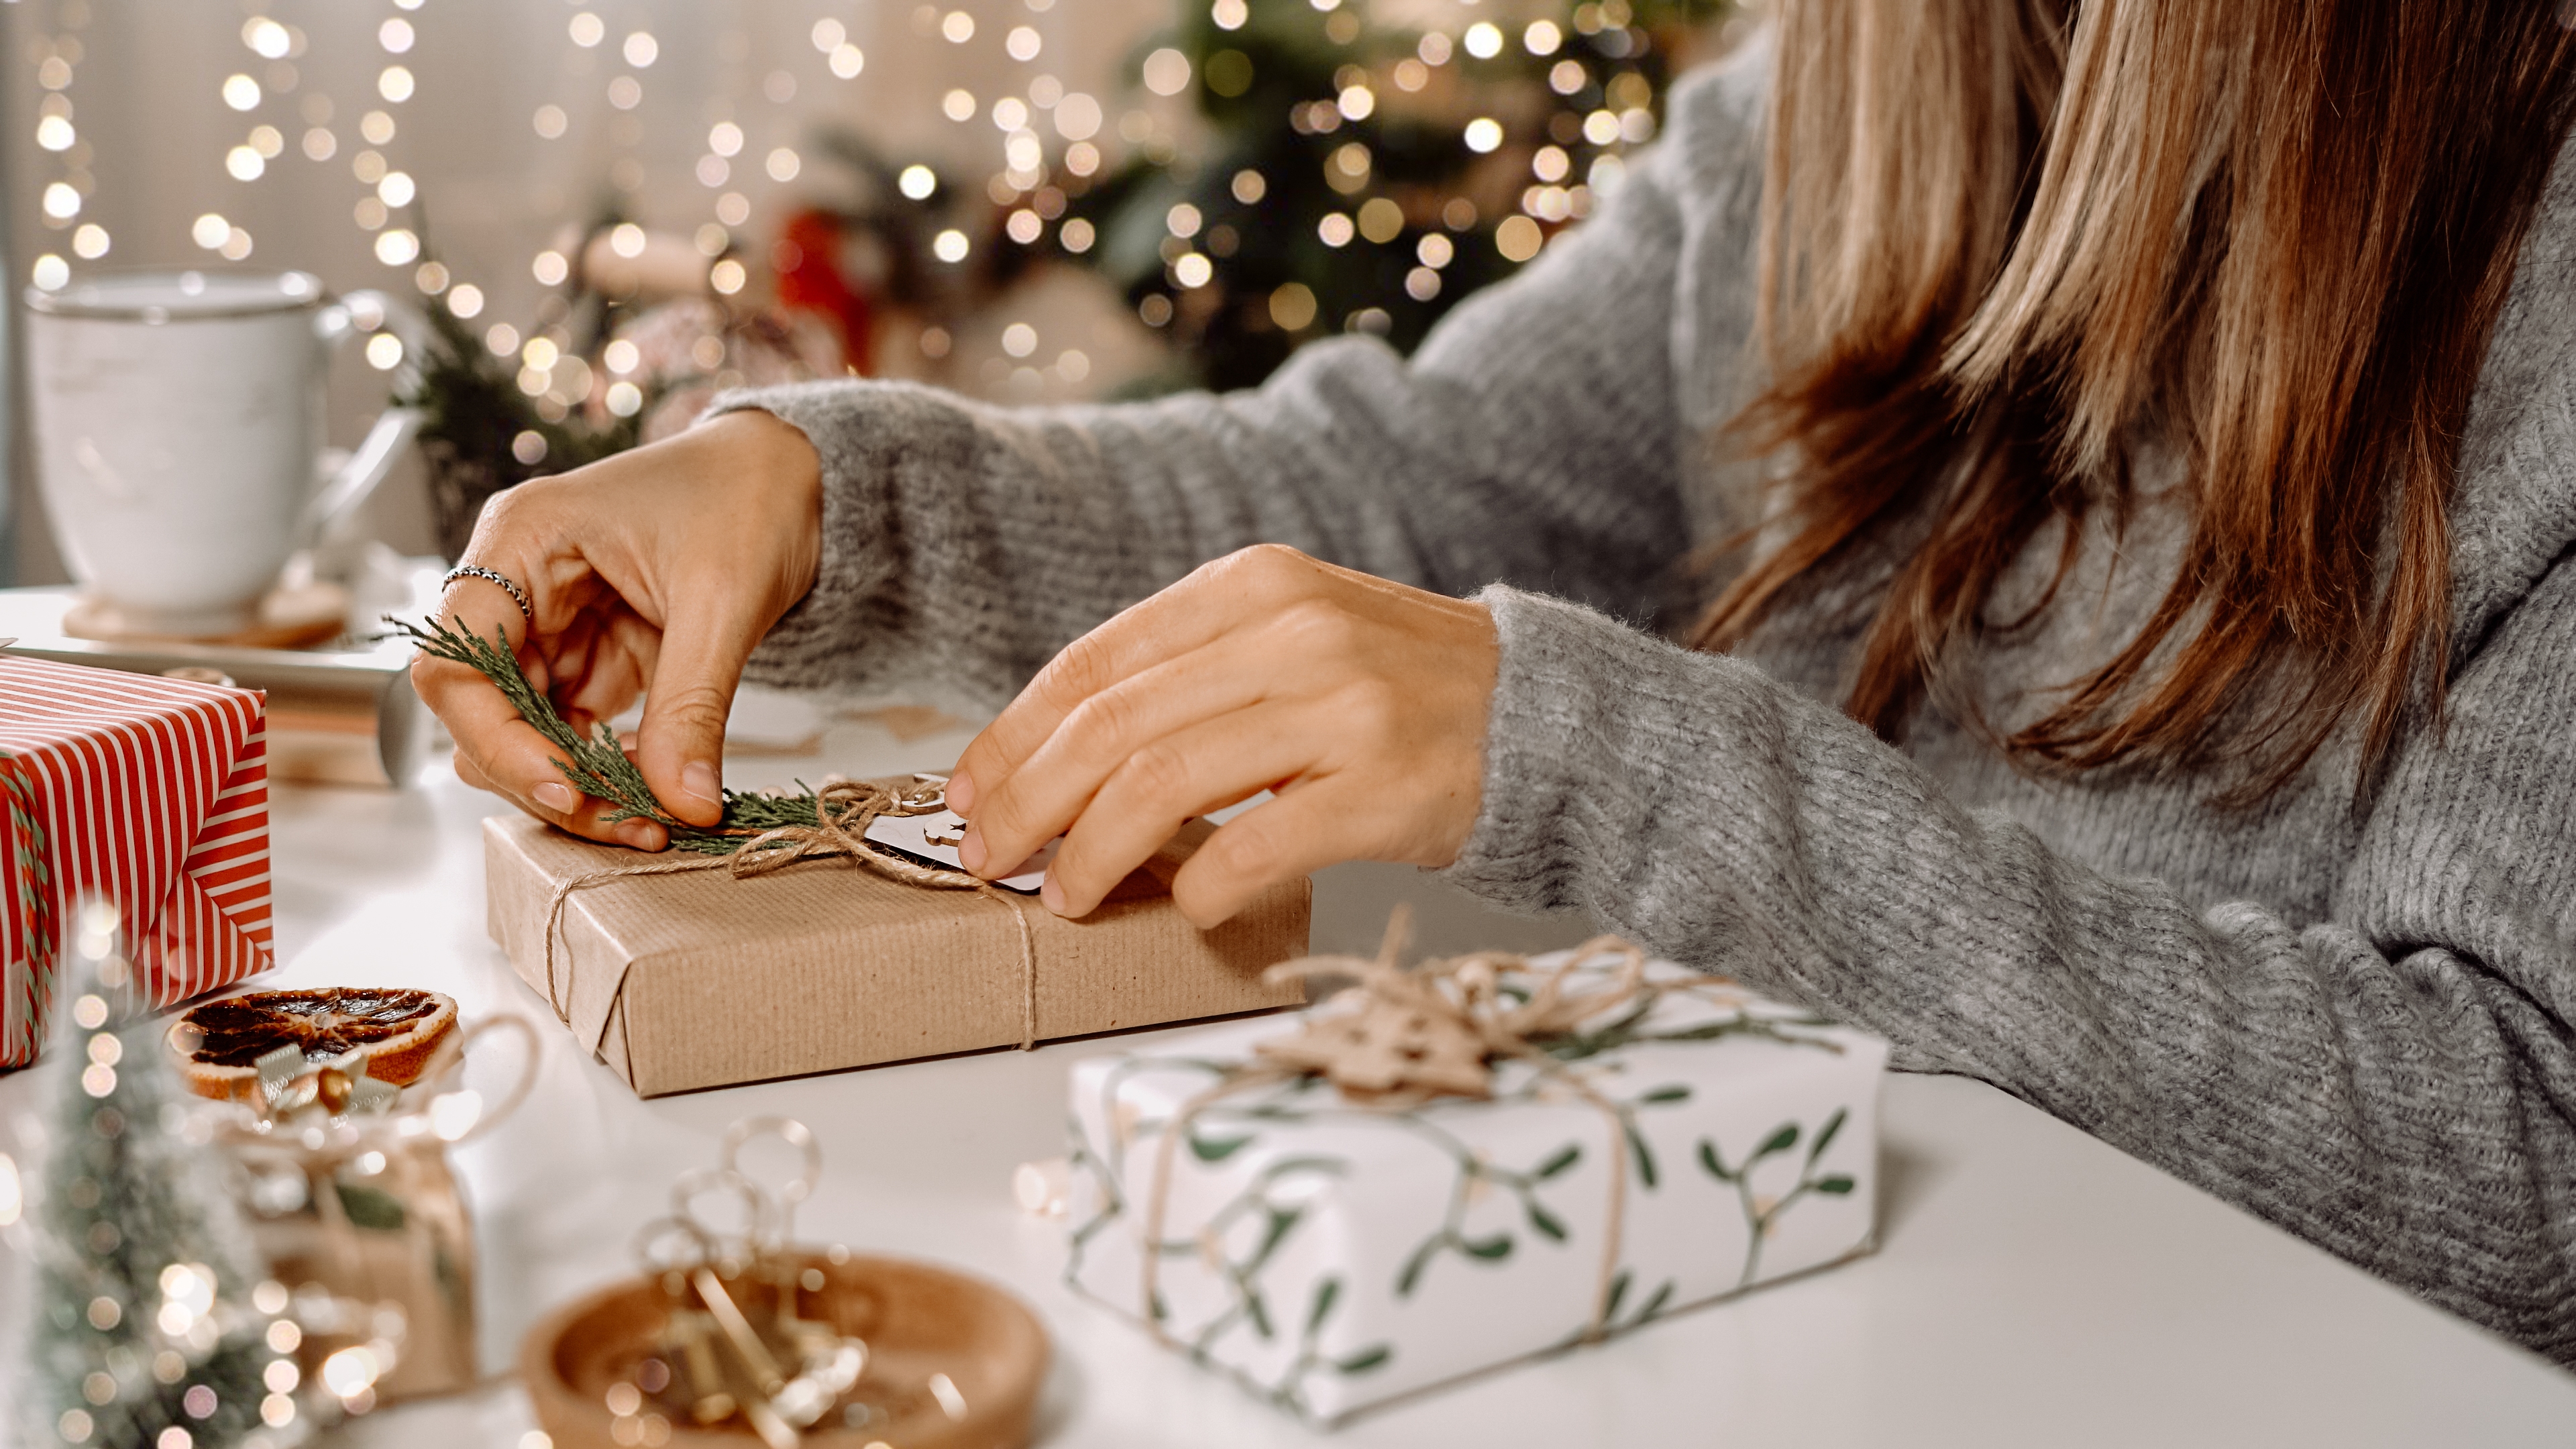 A woman wrapping gifts | Source: Shutterstock